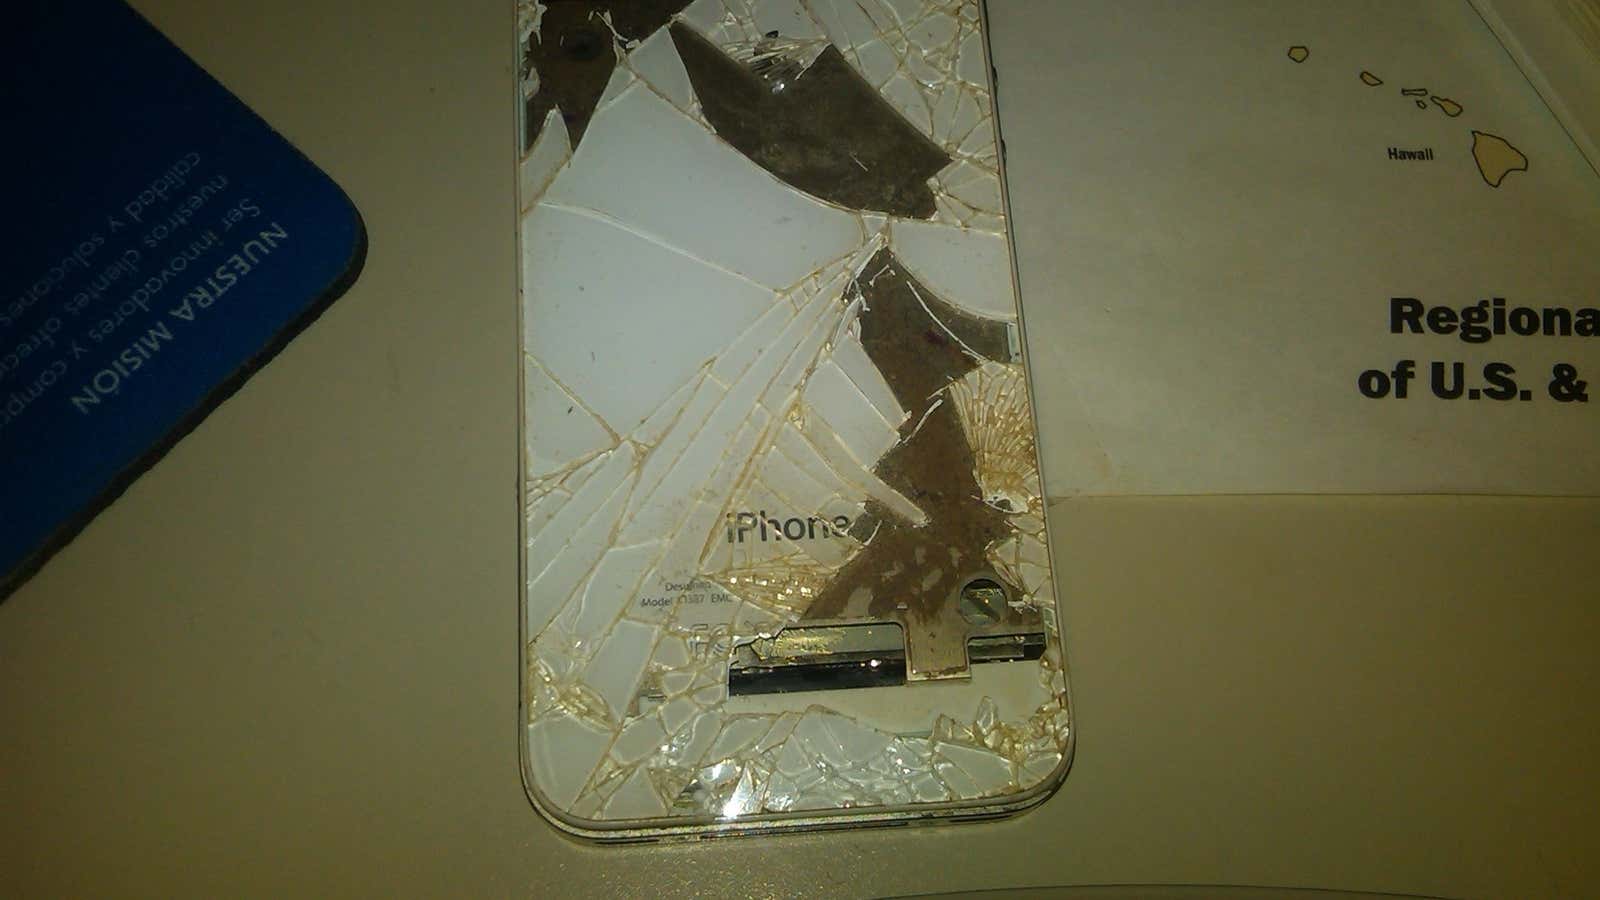 The iPhone 4S after the incident